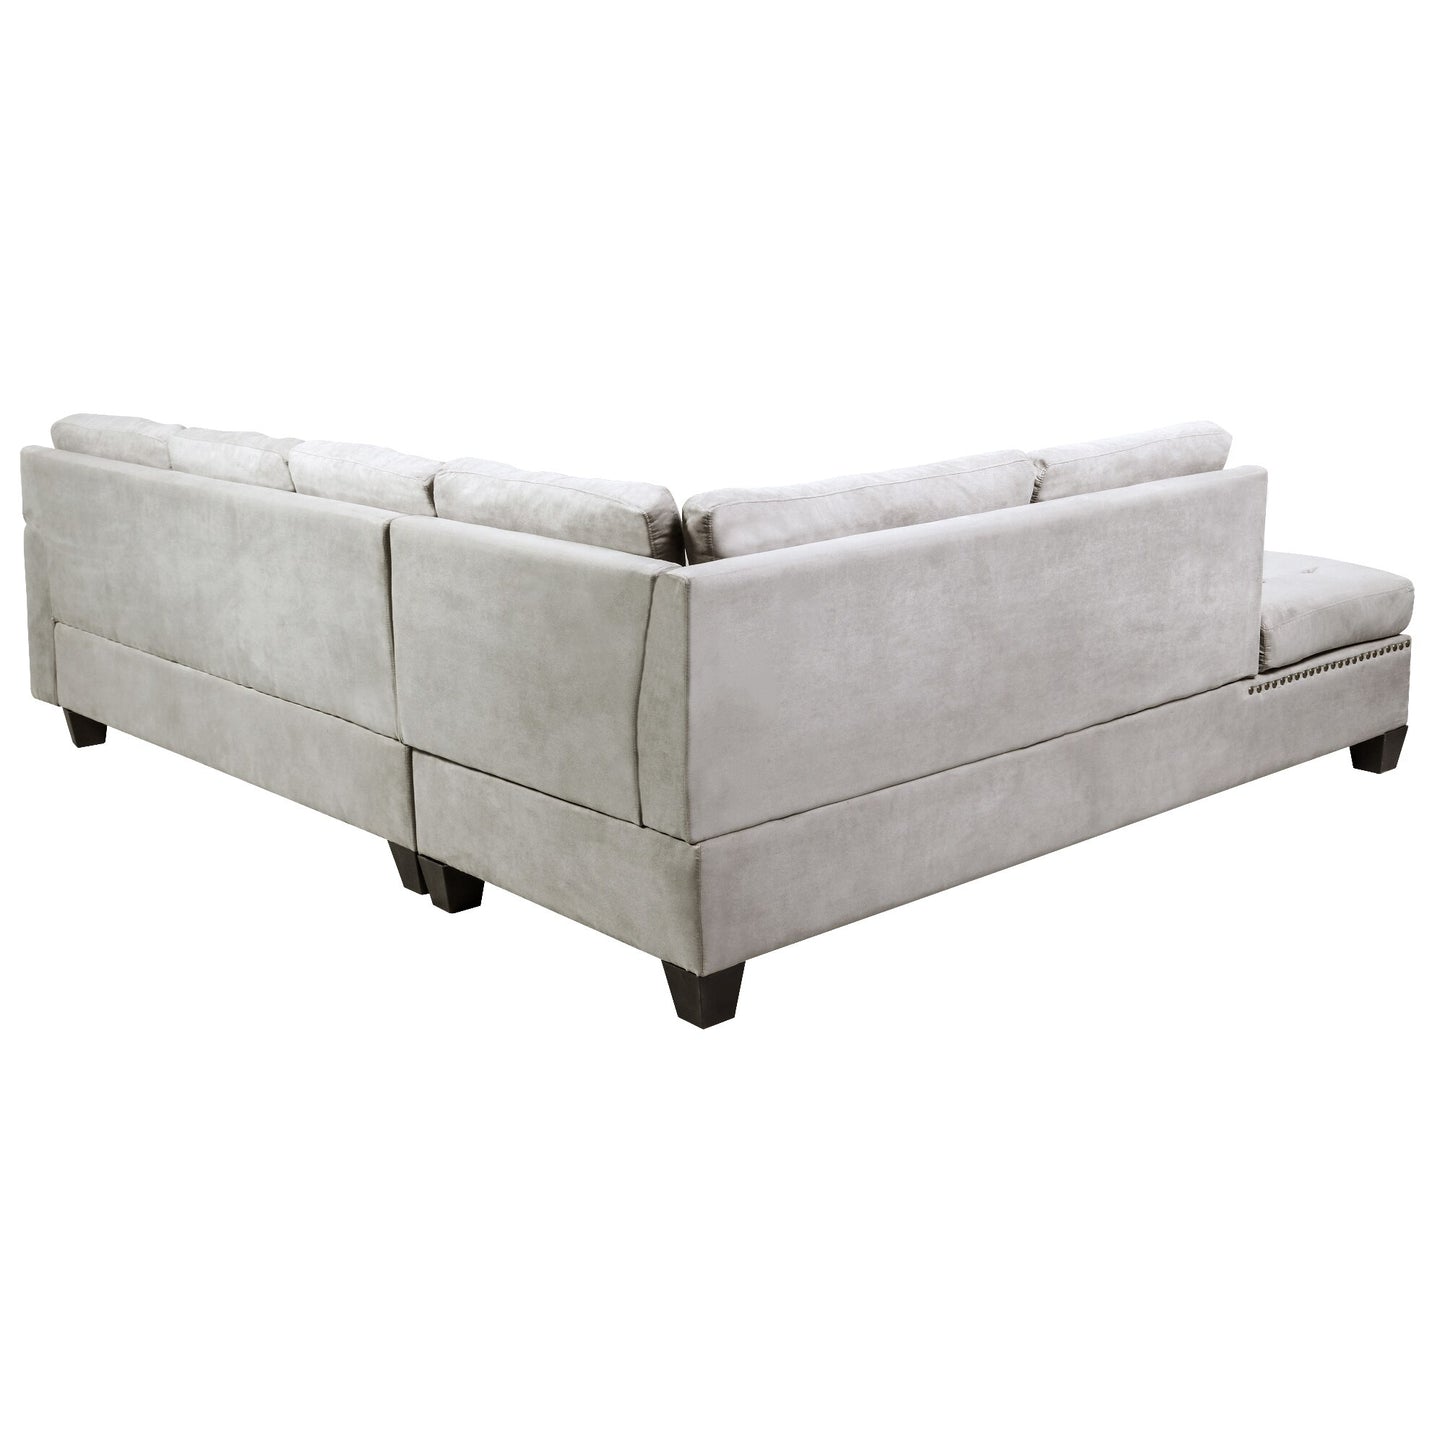 Sectional Sofa Set With Chaise Lounge And Storage Ottoman Nail Head Detail Grey